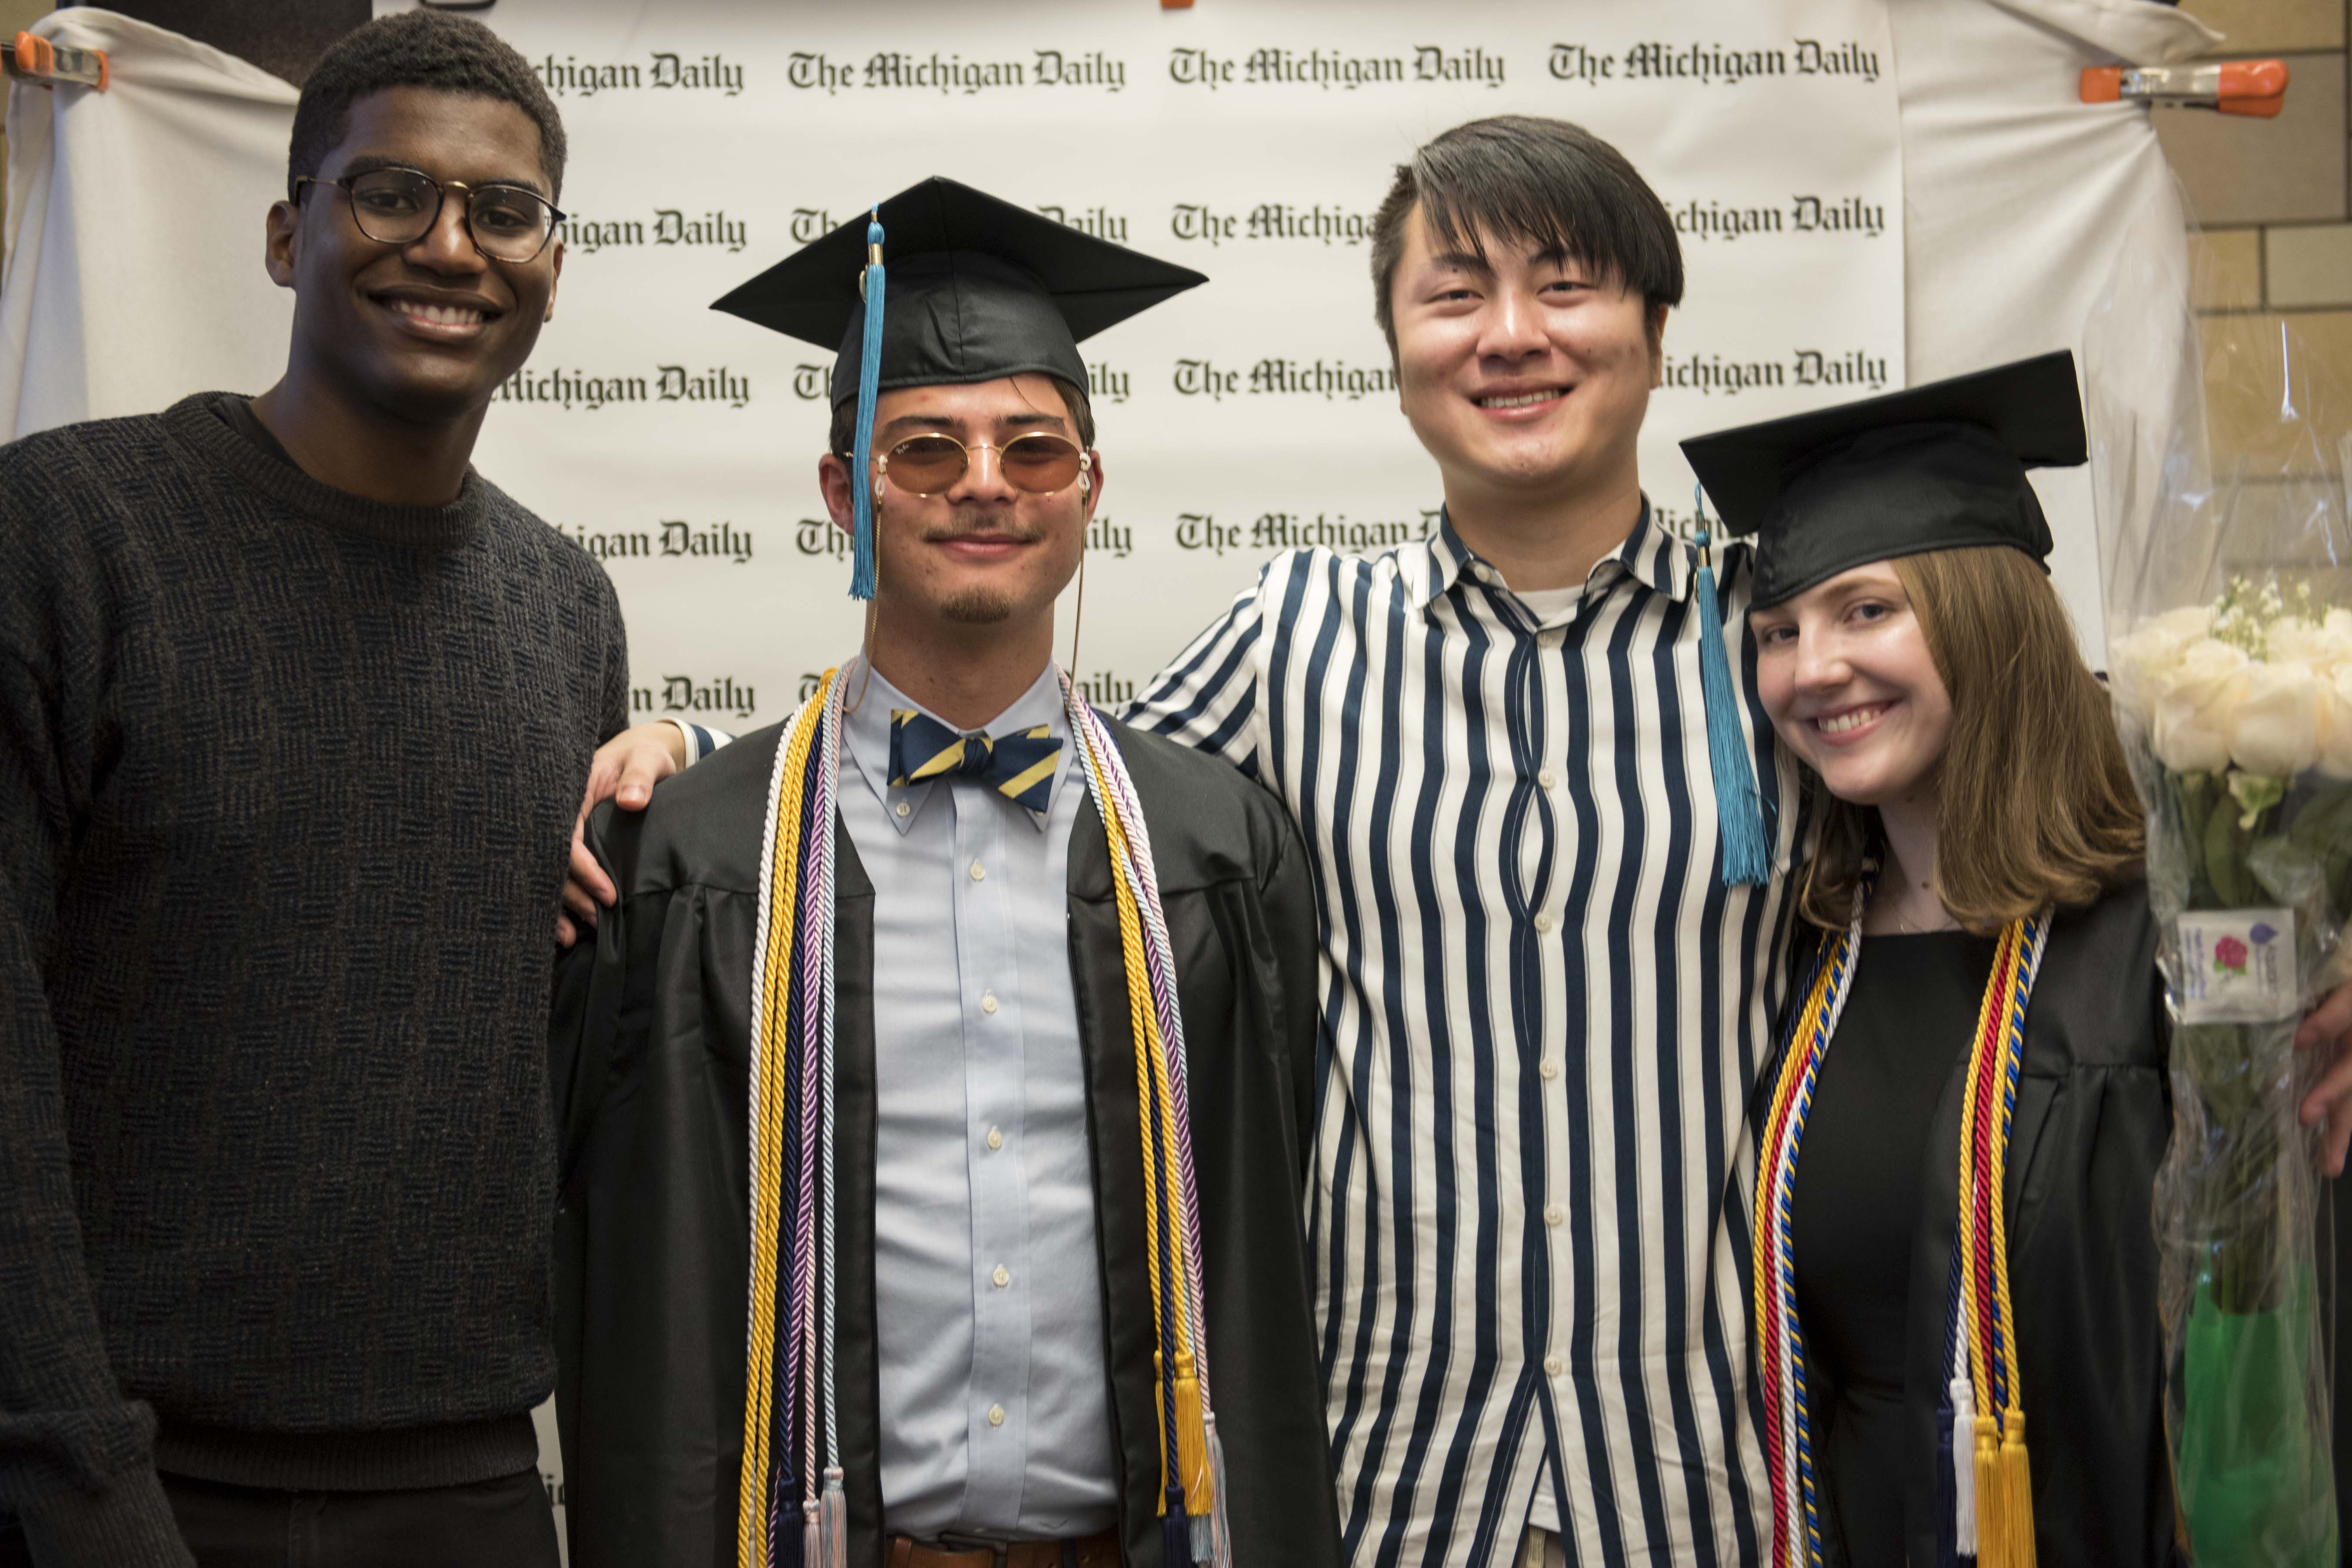 Jason Rowland, Andrew Hiyama, Orion Sang, Sophie Sherry, The Michigan Daily Class of 2019